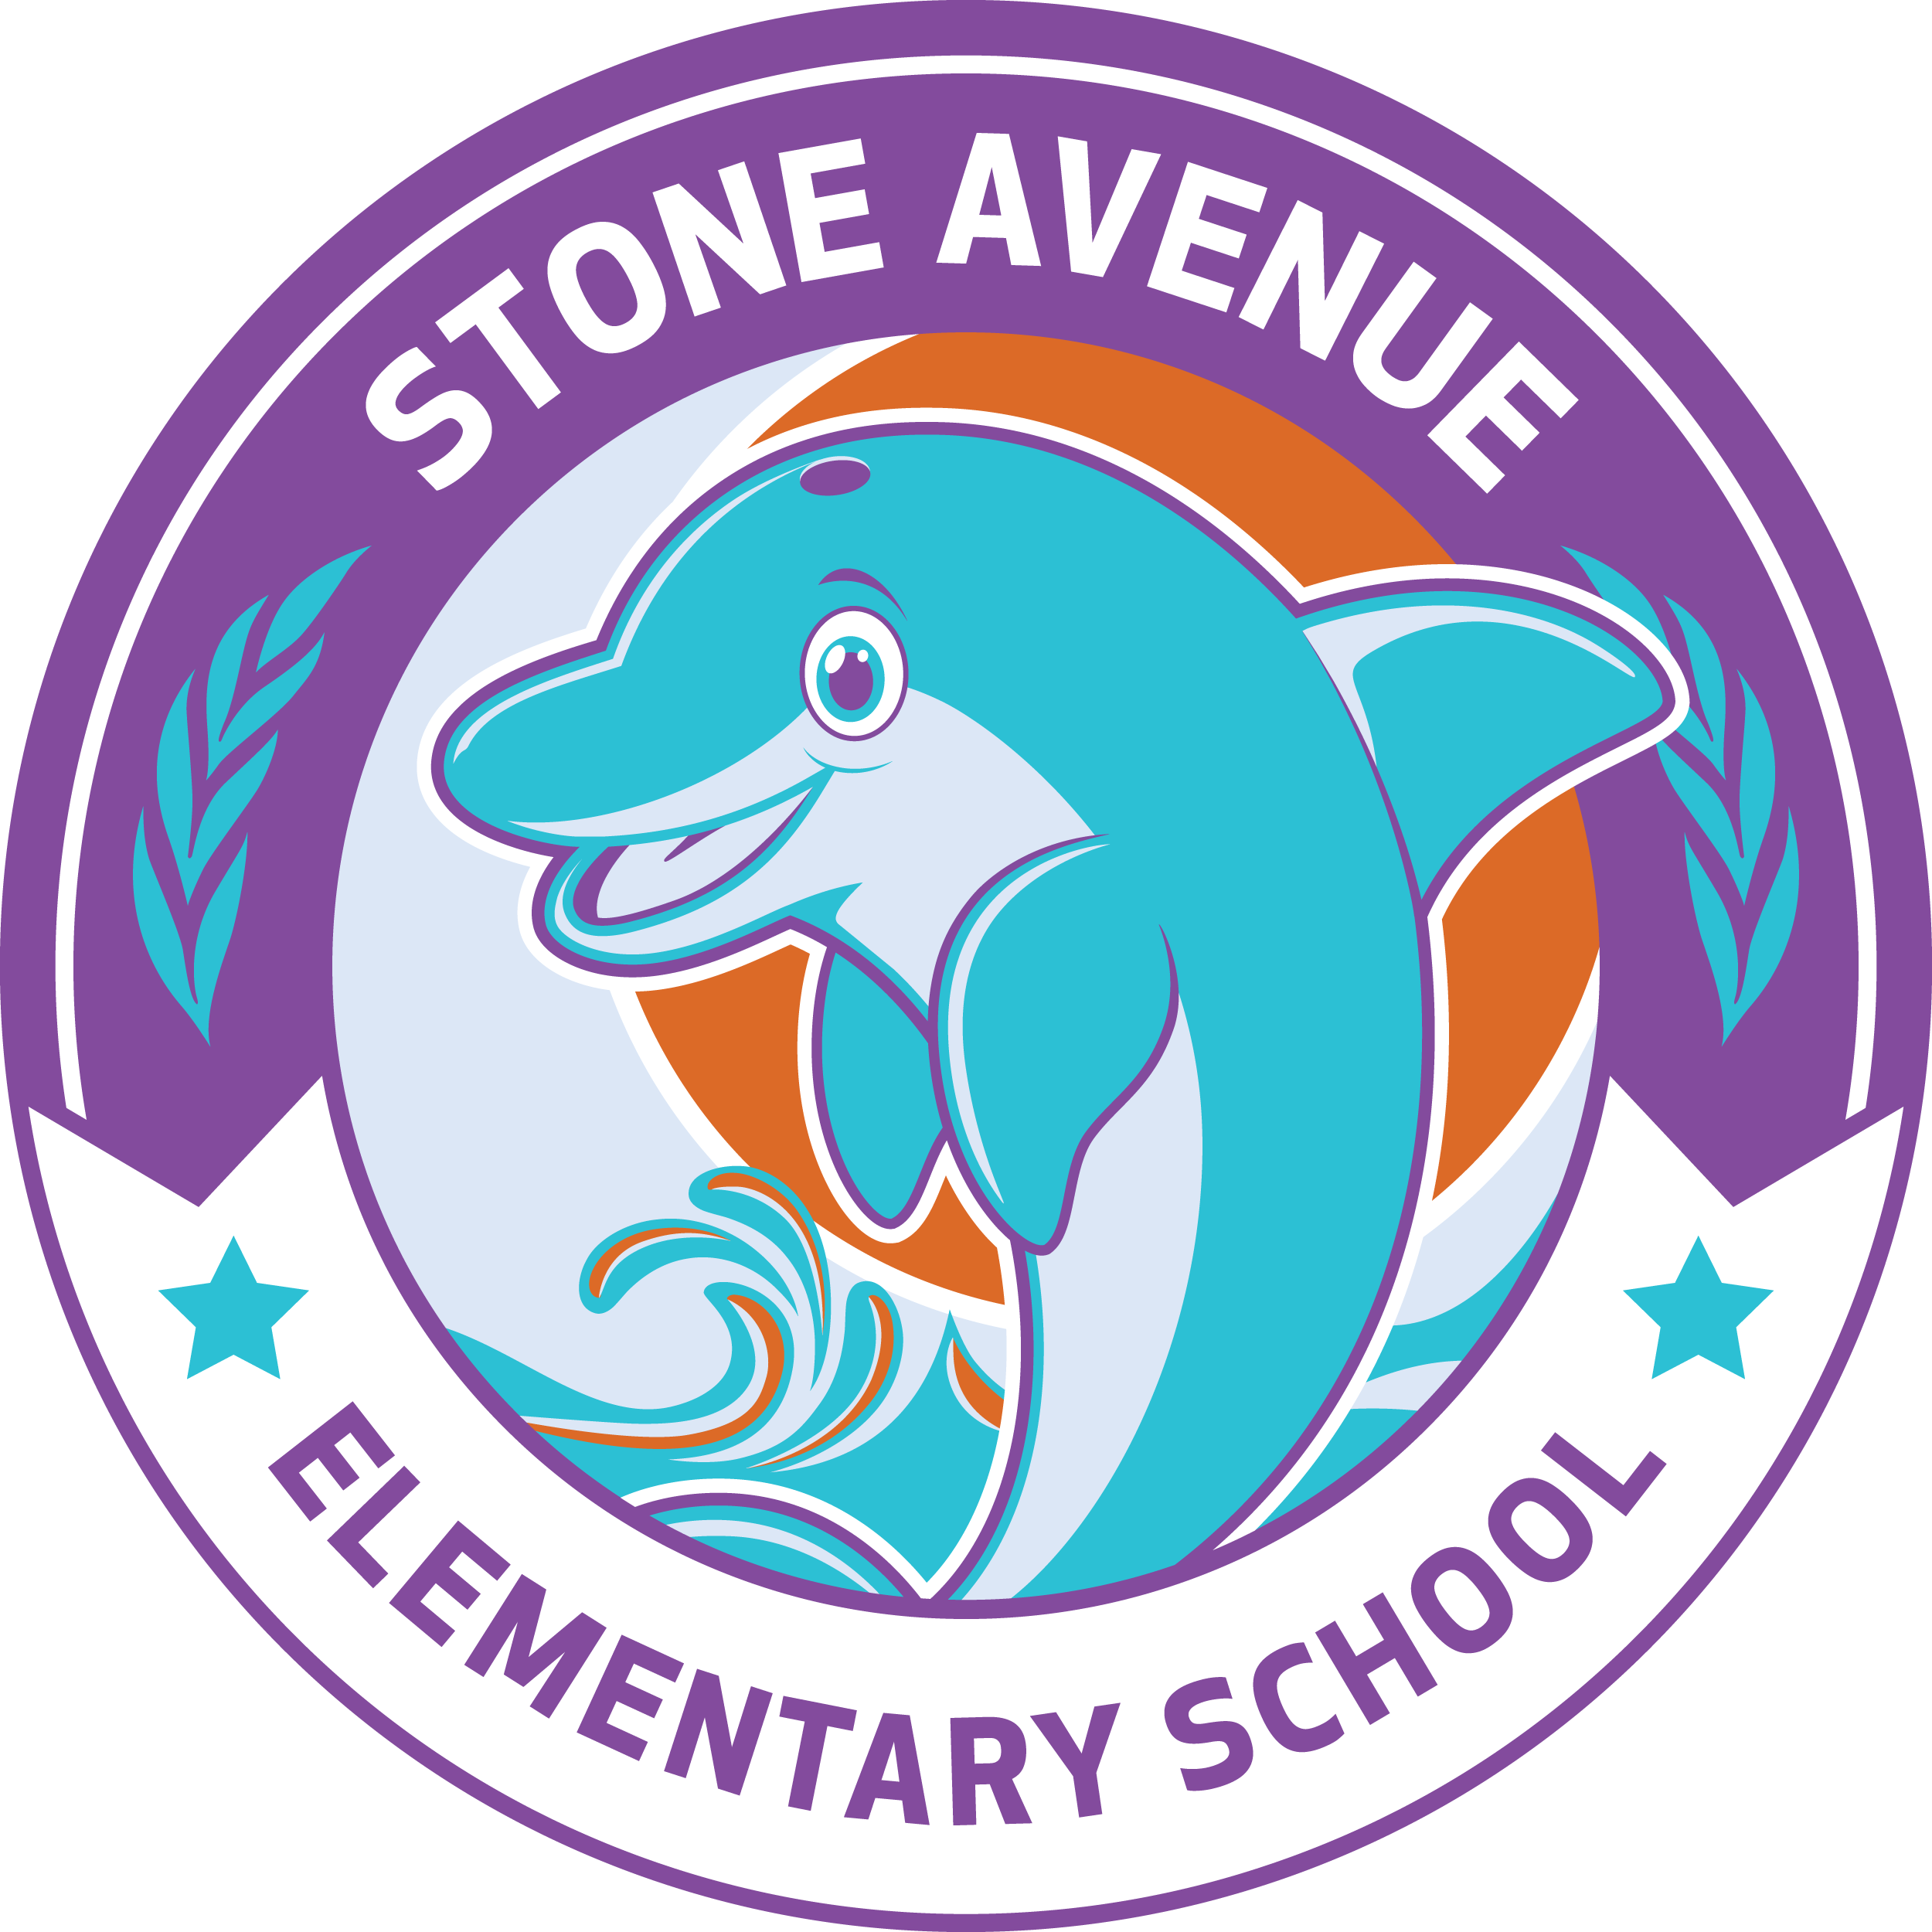 Stone Ave logo.png